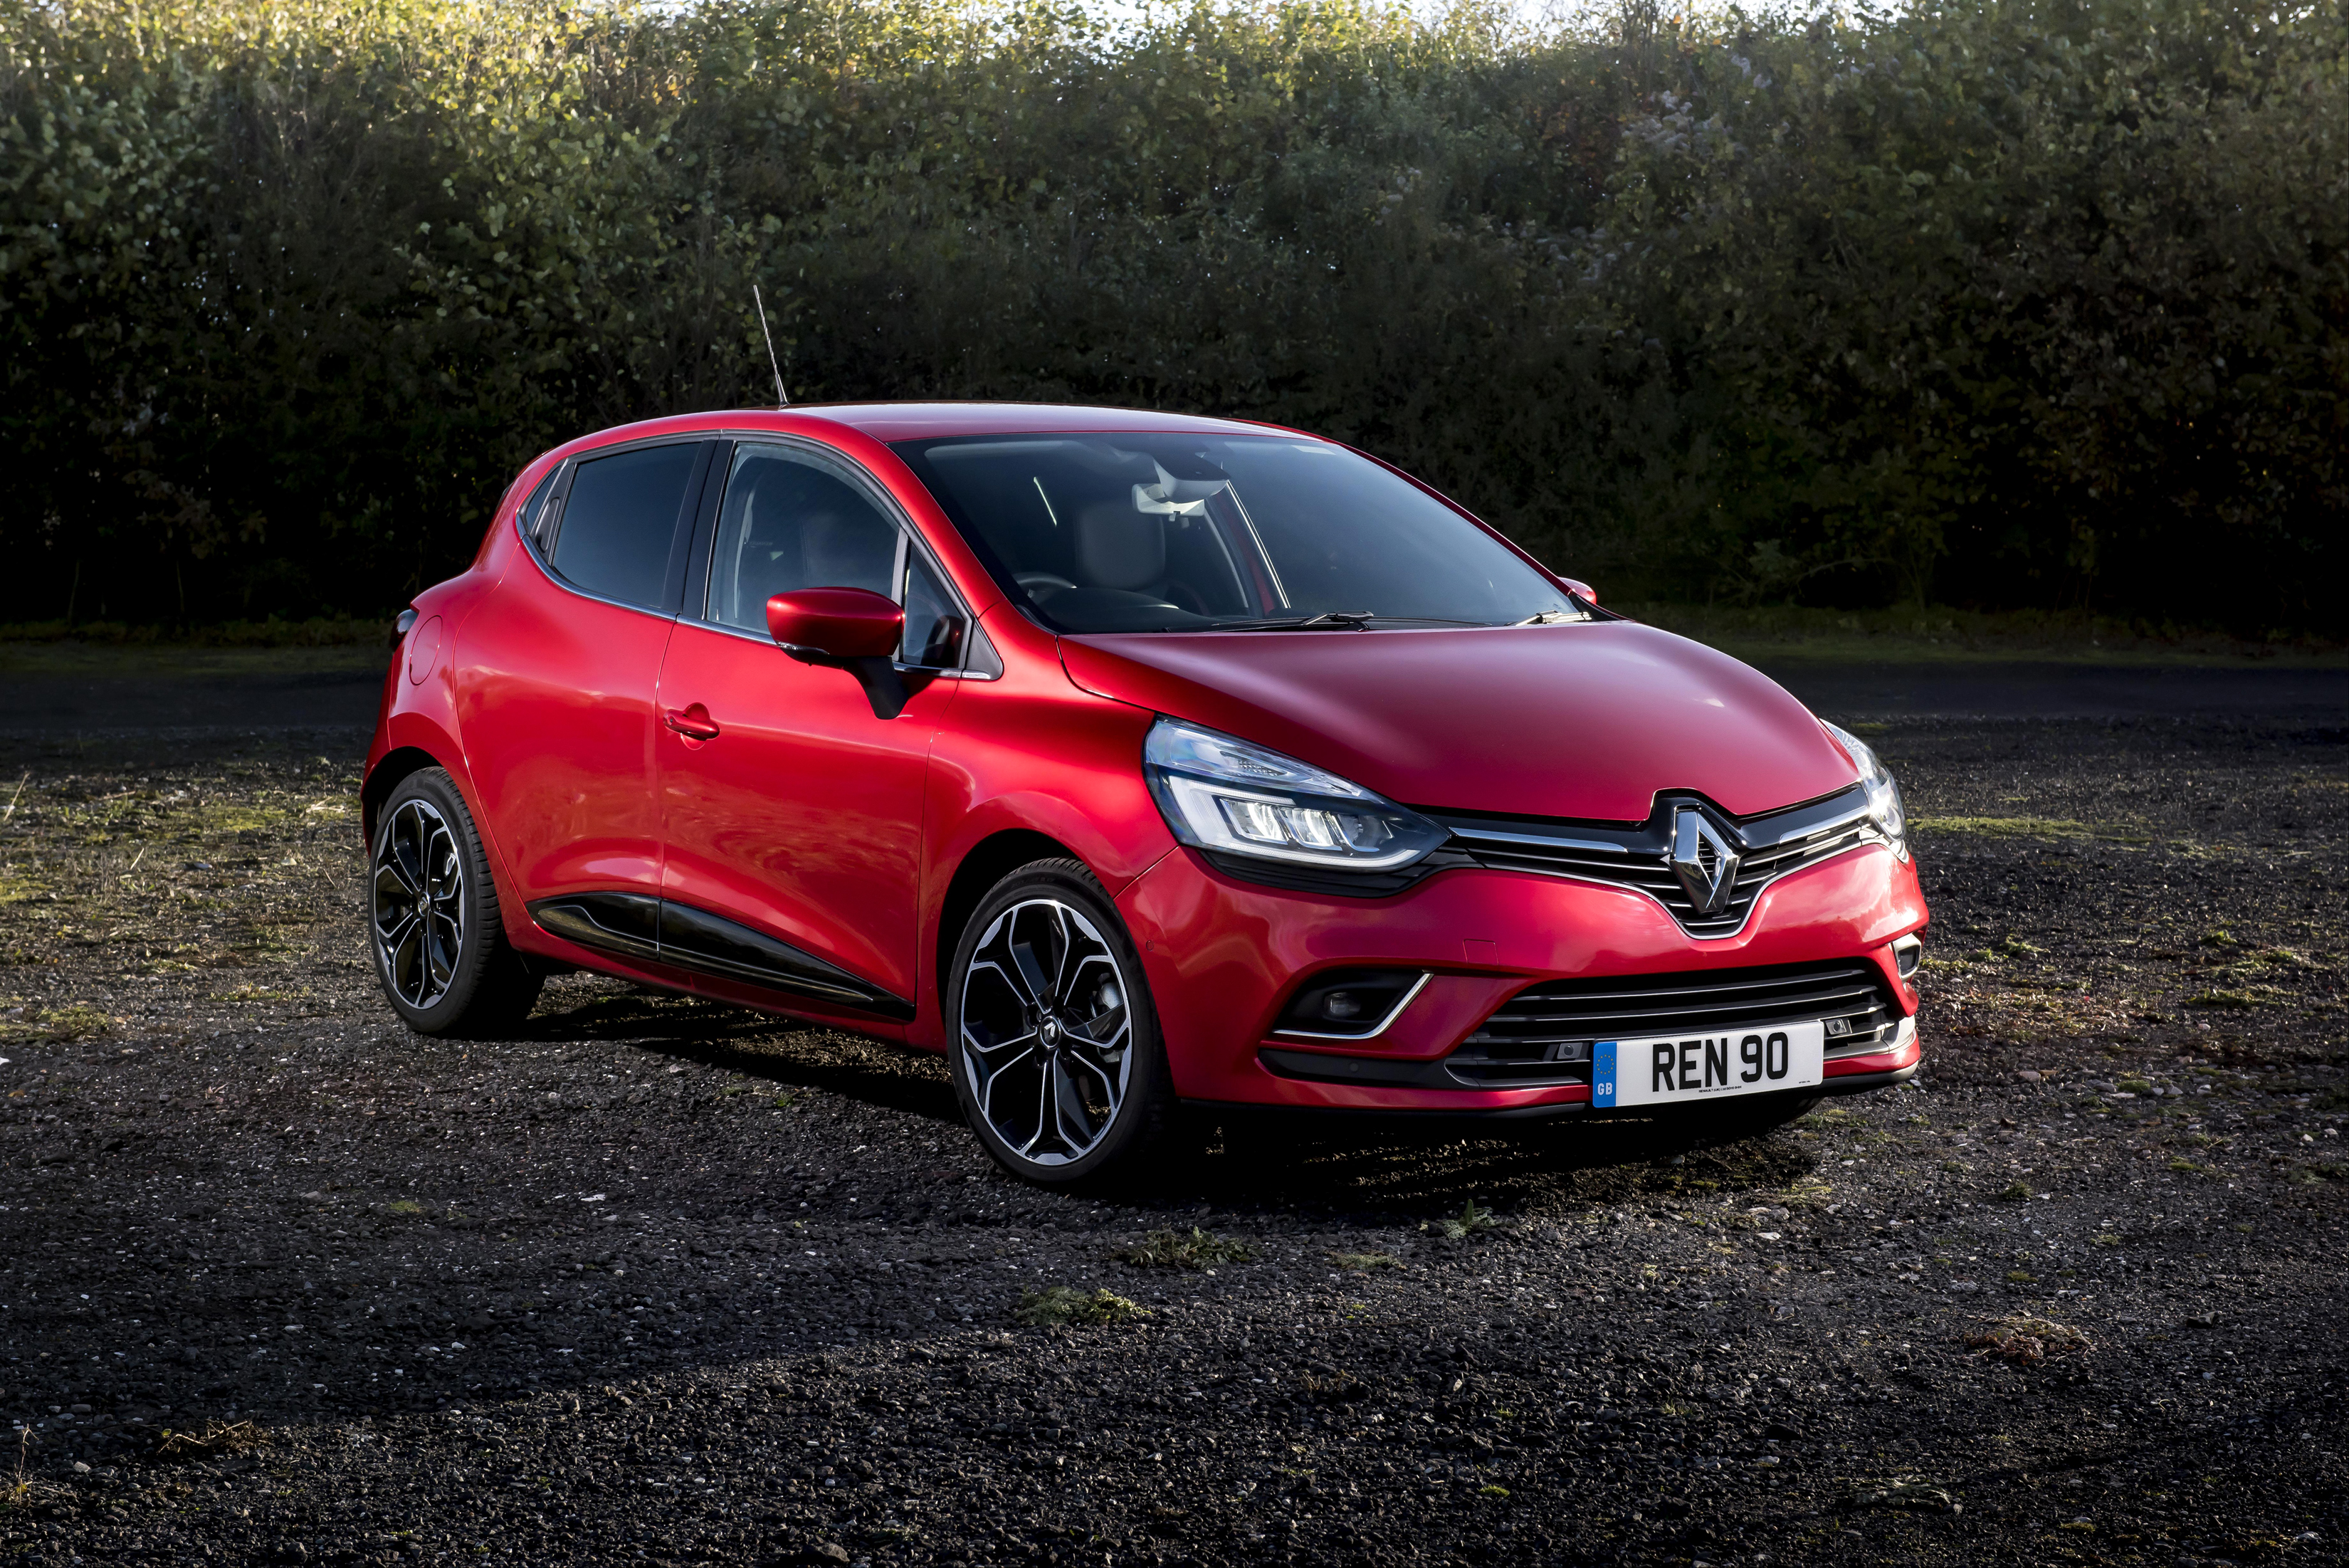 Renault Clio Renault Red Car Car Vehicle Compact Car 3300x2203